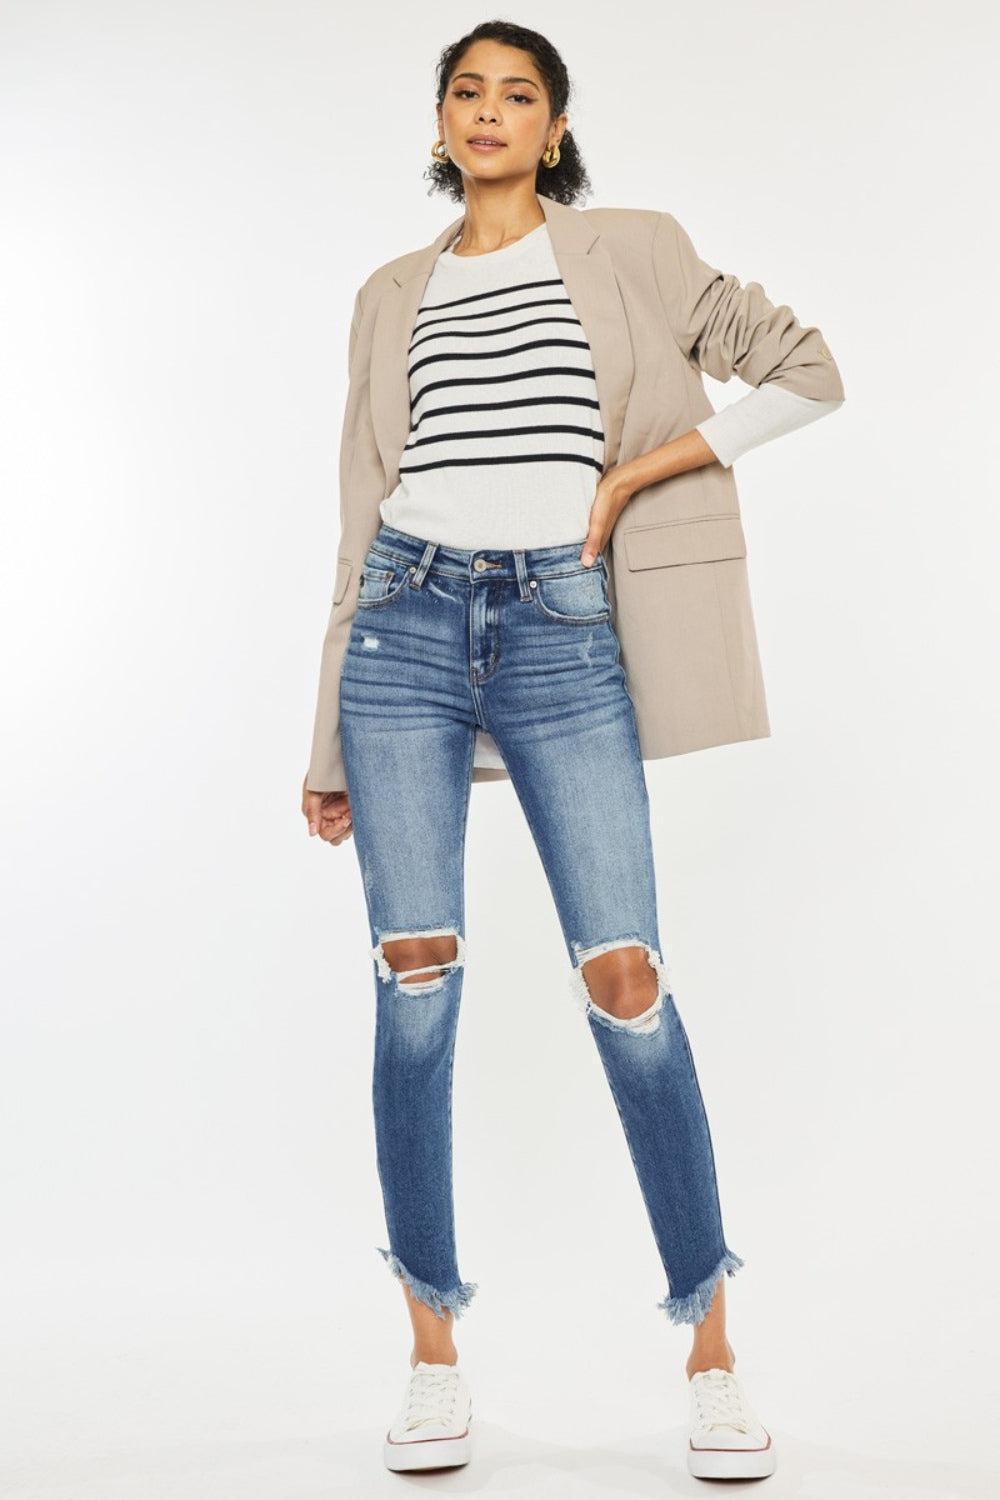 a woman wearing ripped jeans and a striped shirt